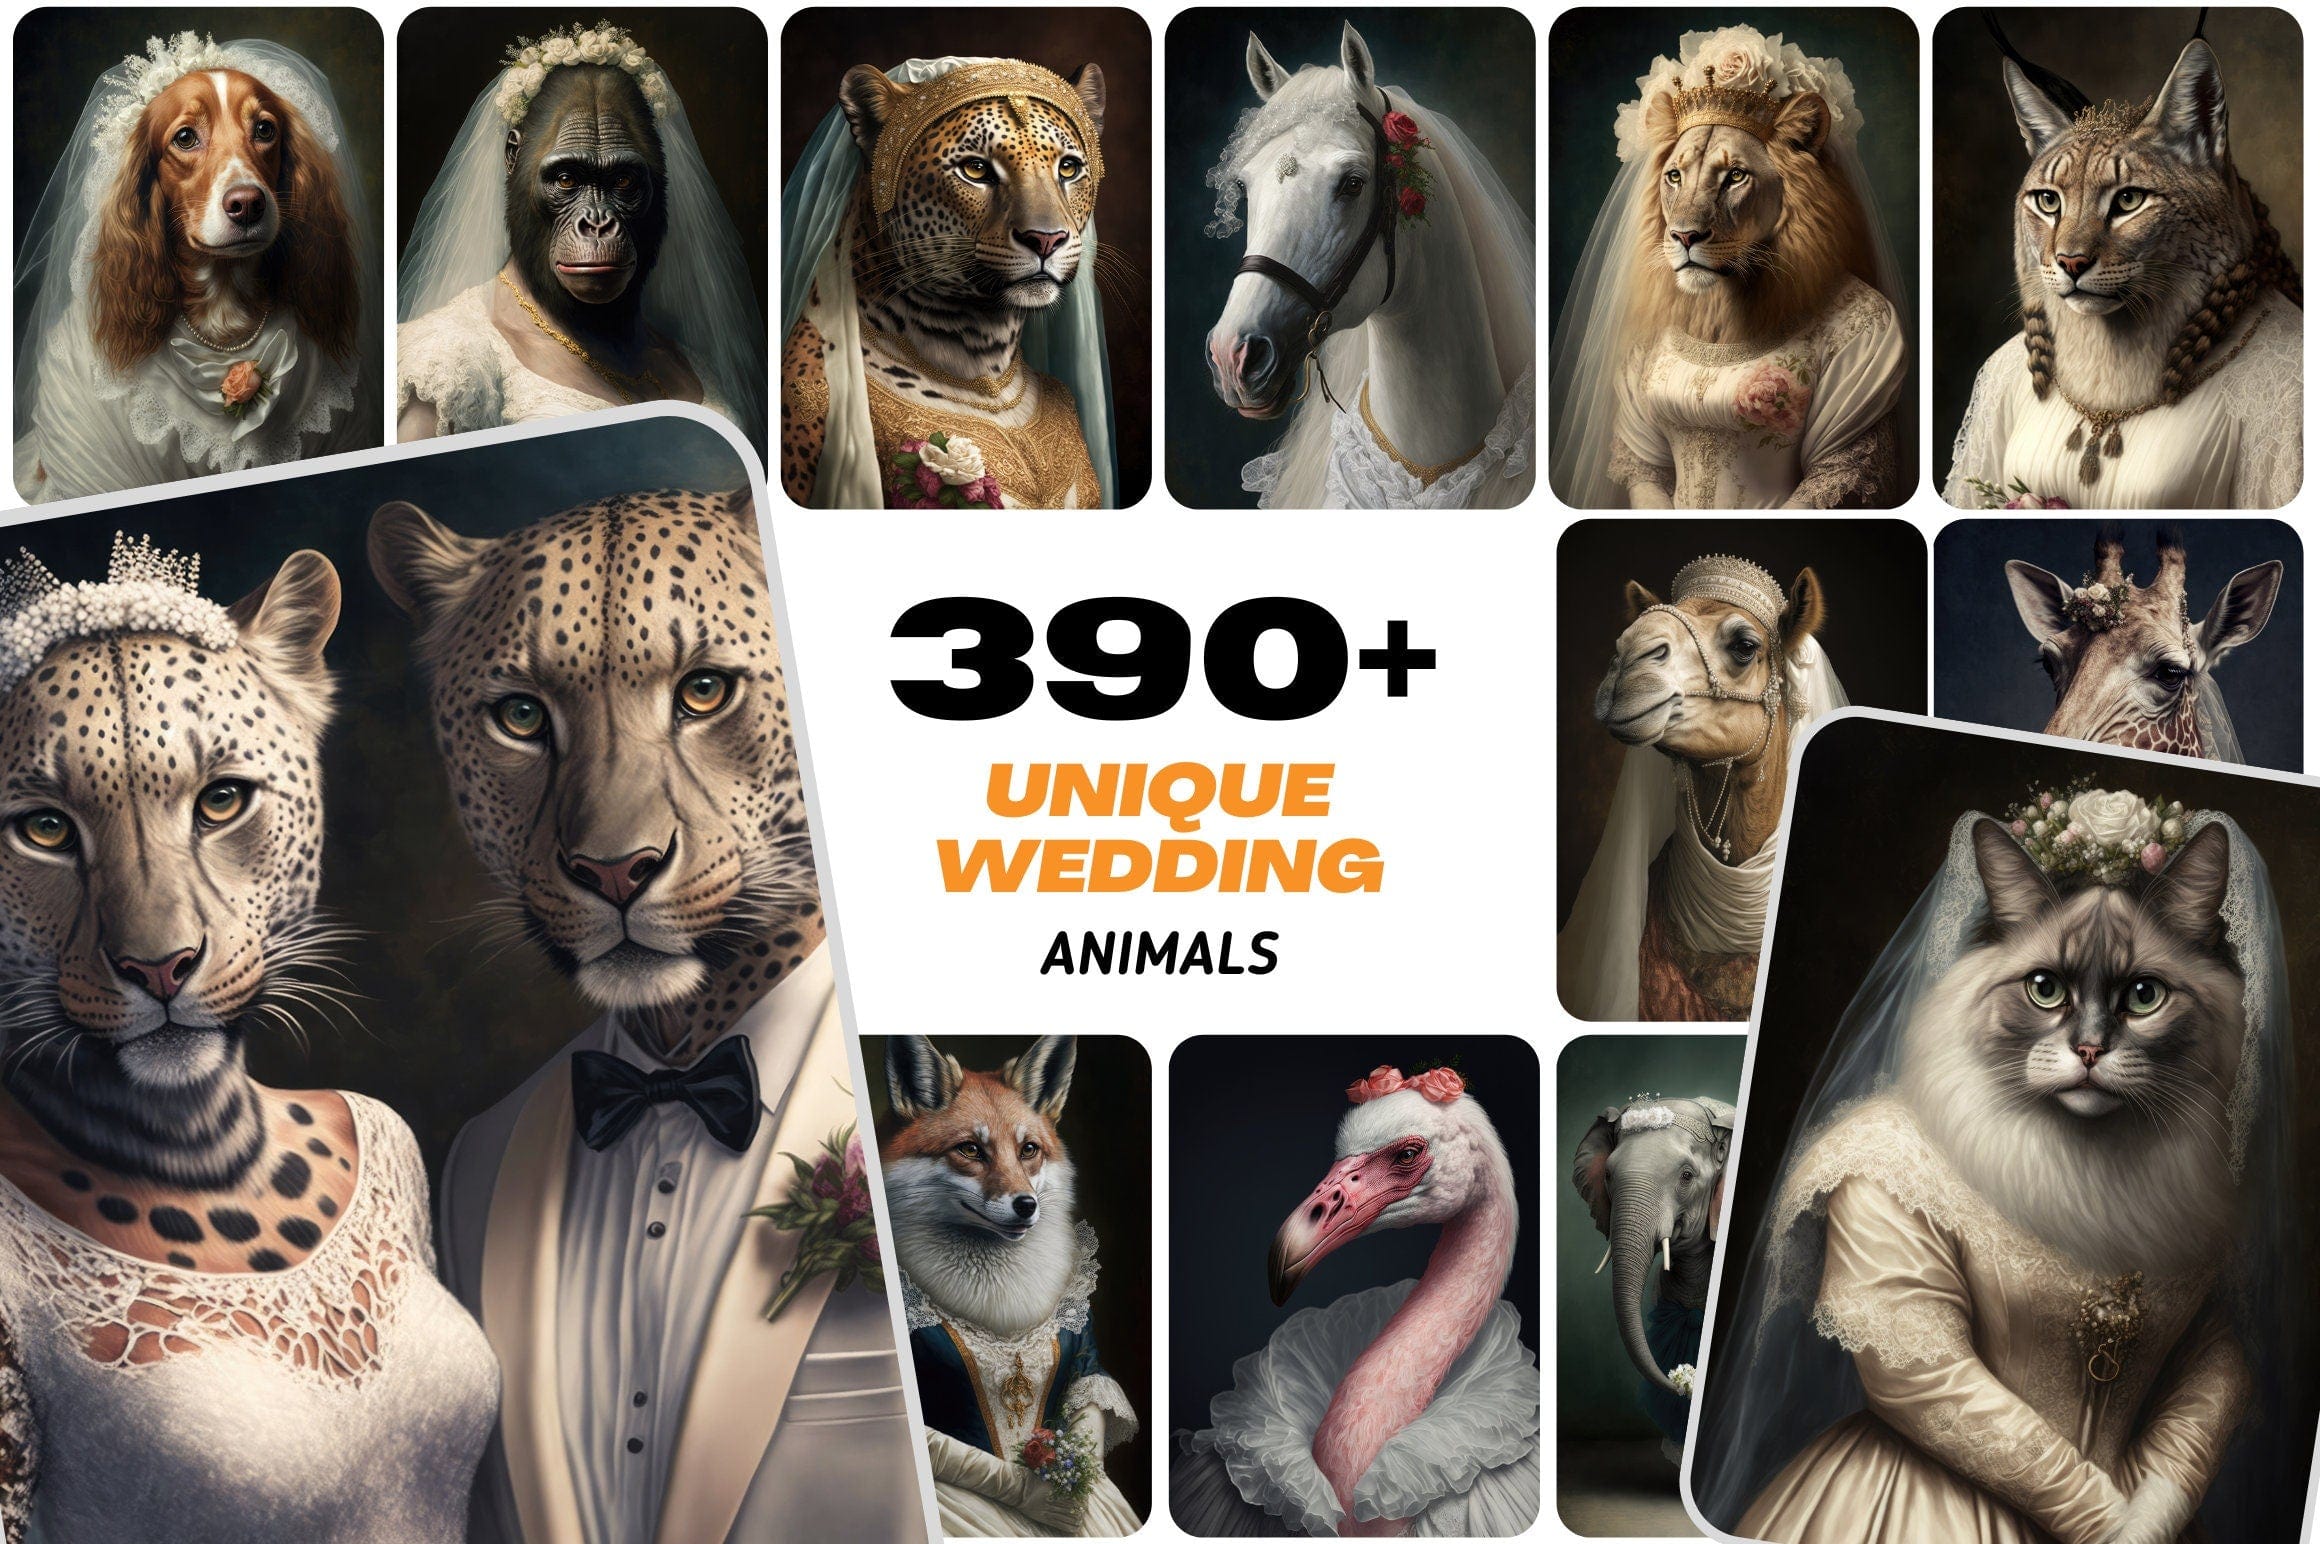 390 Animal Bridal Images, Create Your Own Love Story with 390 Enchanting Animal Bridal Images, Wedding clipart, Bride animals clipart Digital Download Sumobundle